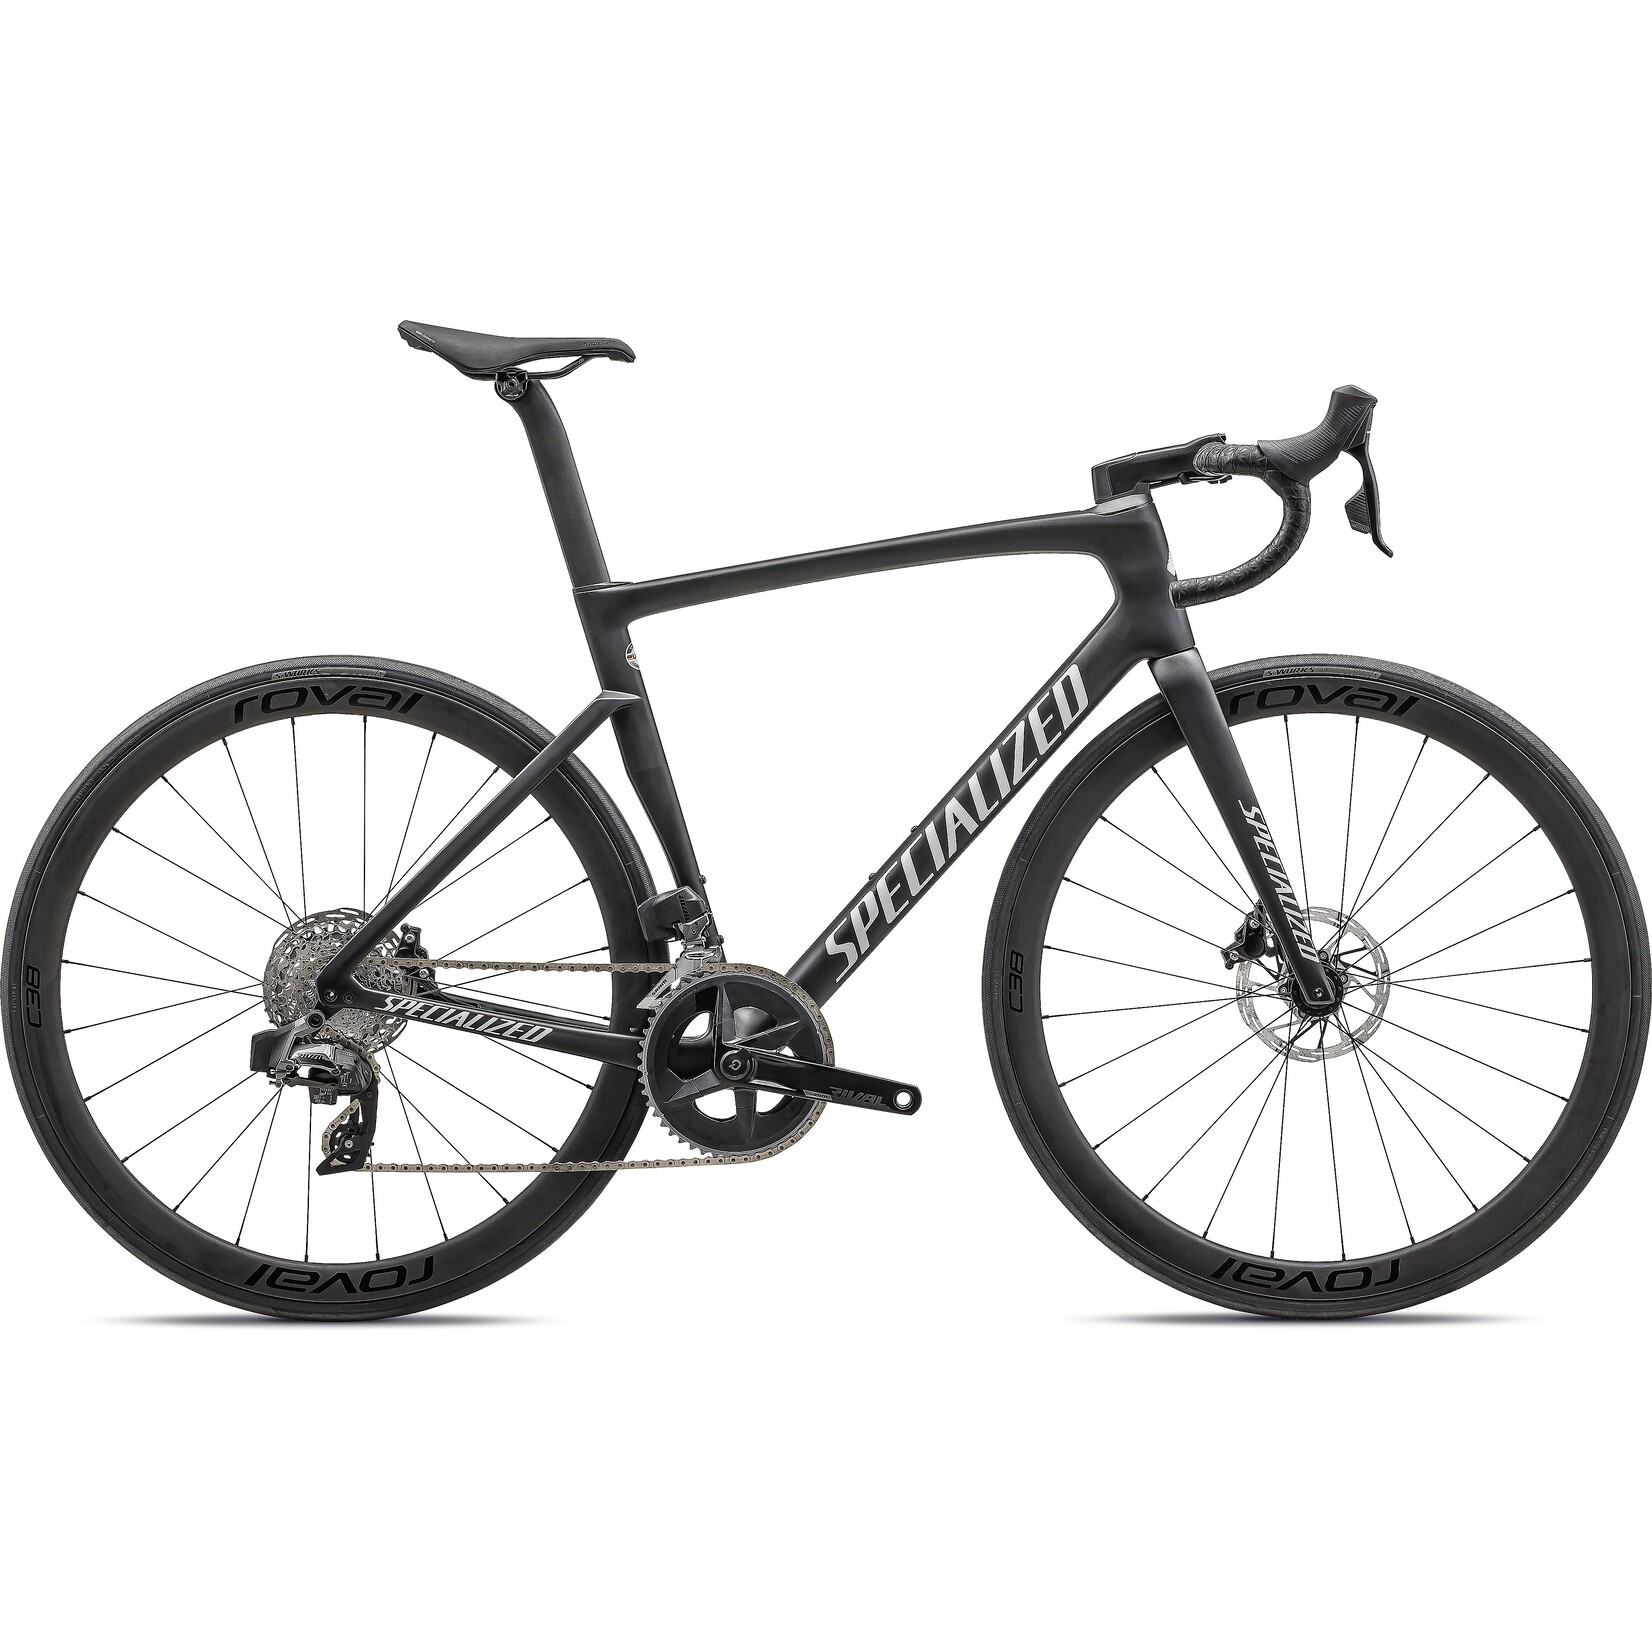 Specialized Tarmac SL7 Expert in Satin Carbon/White